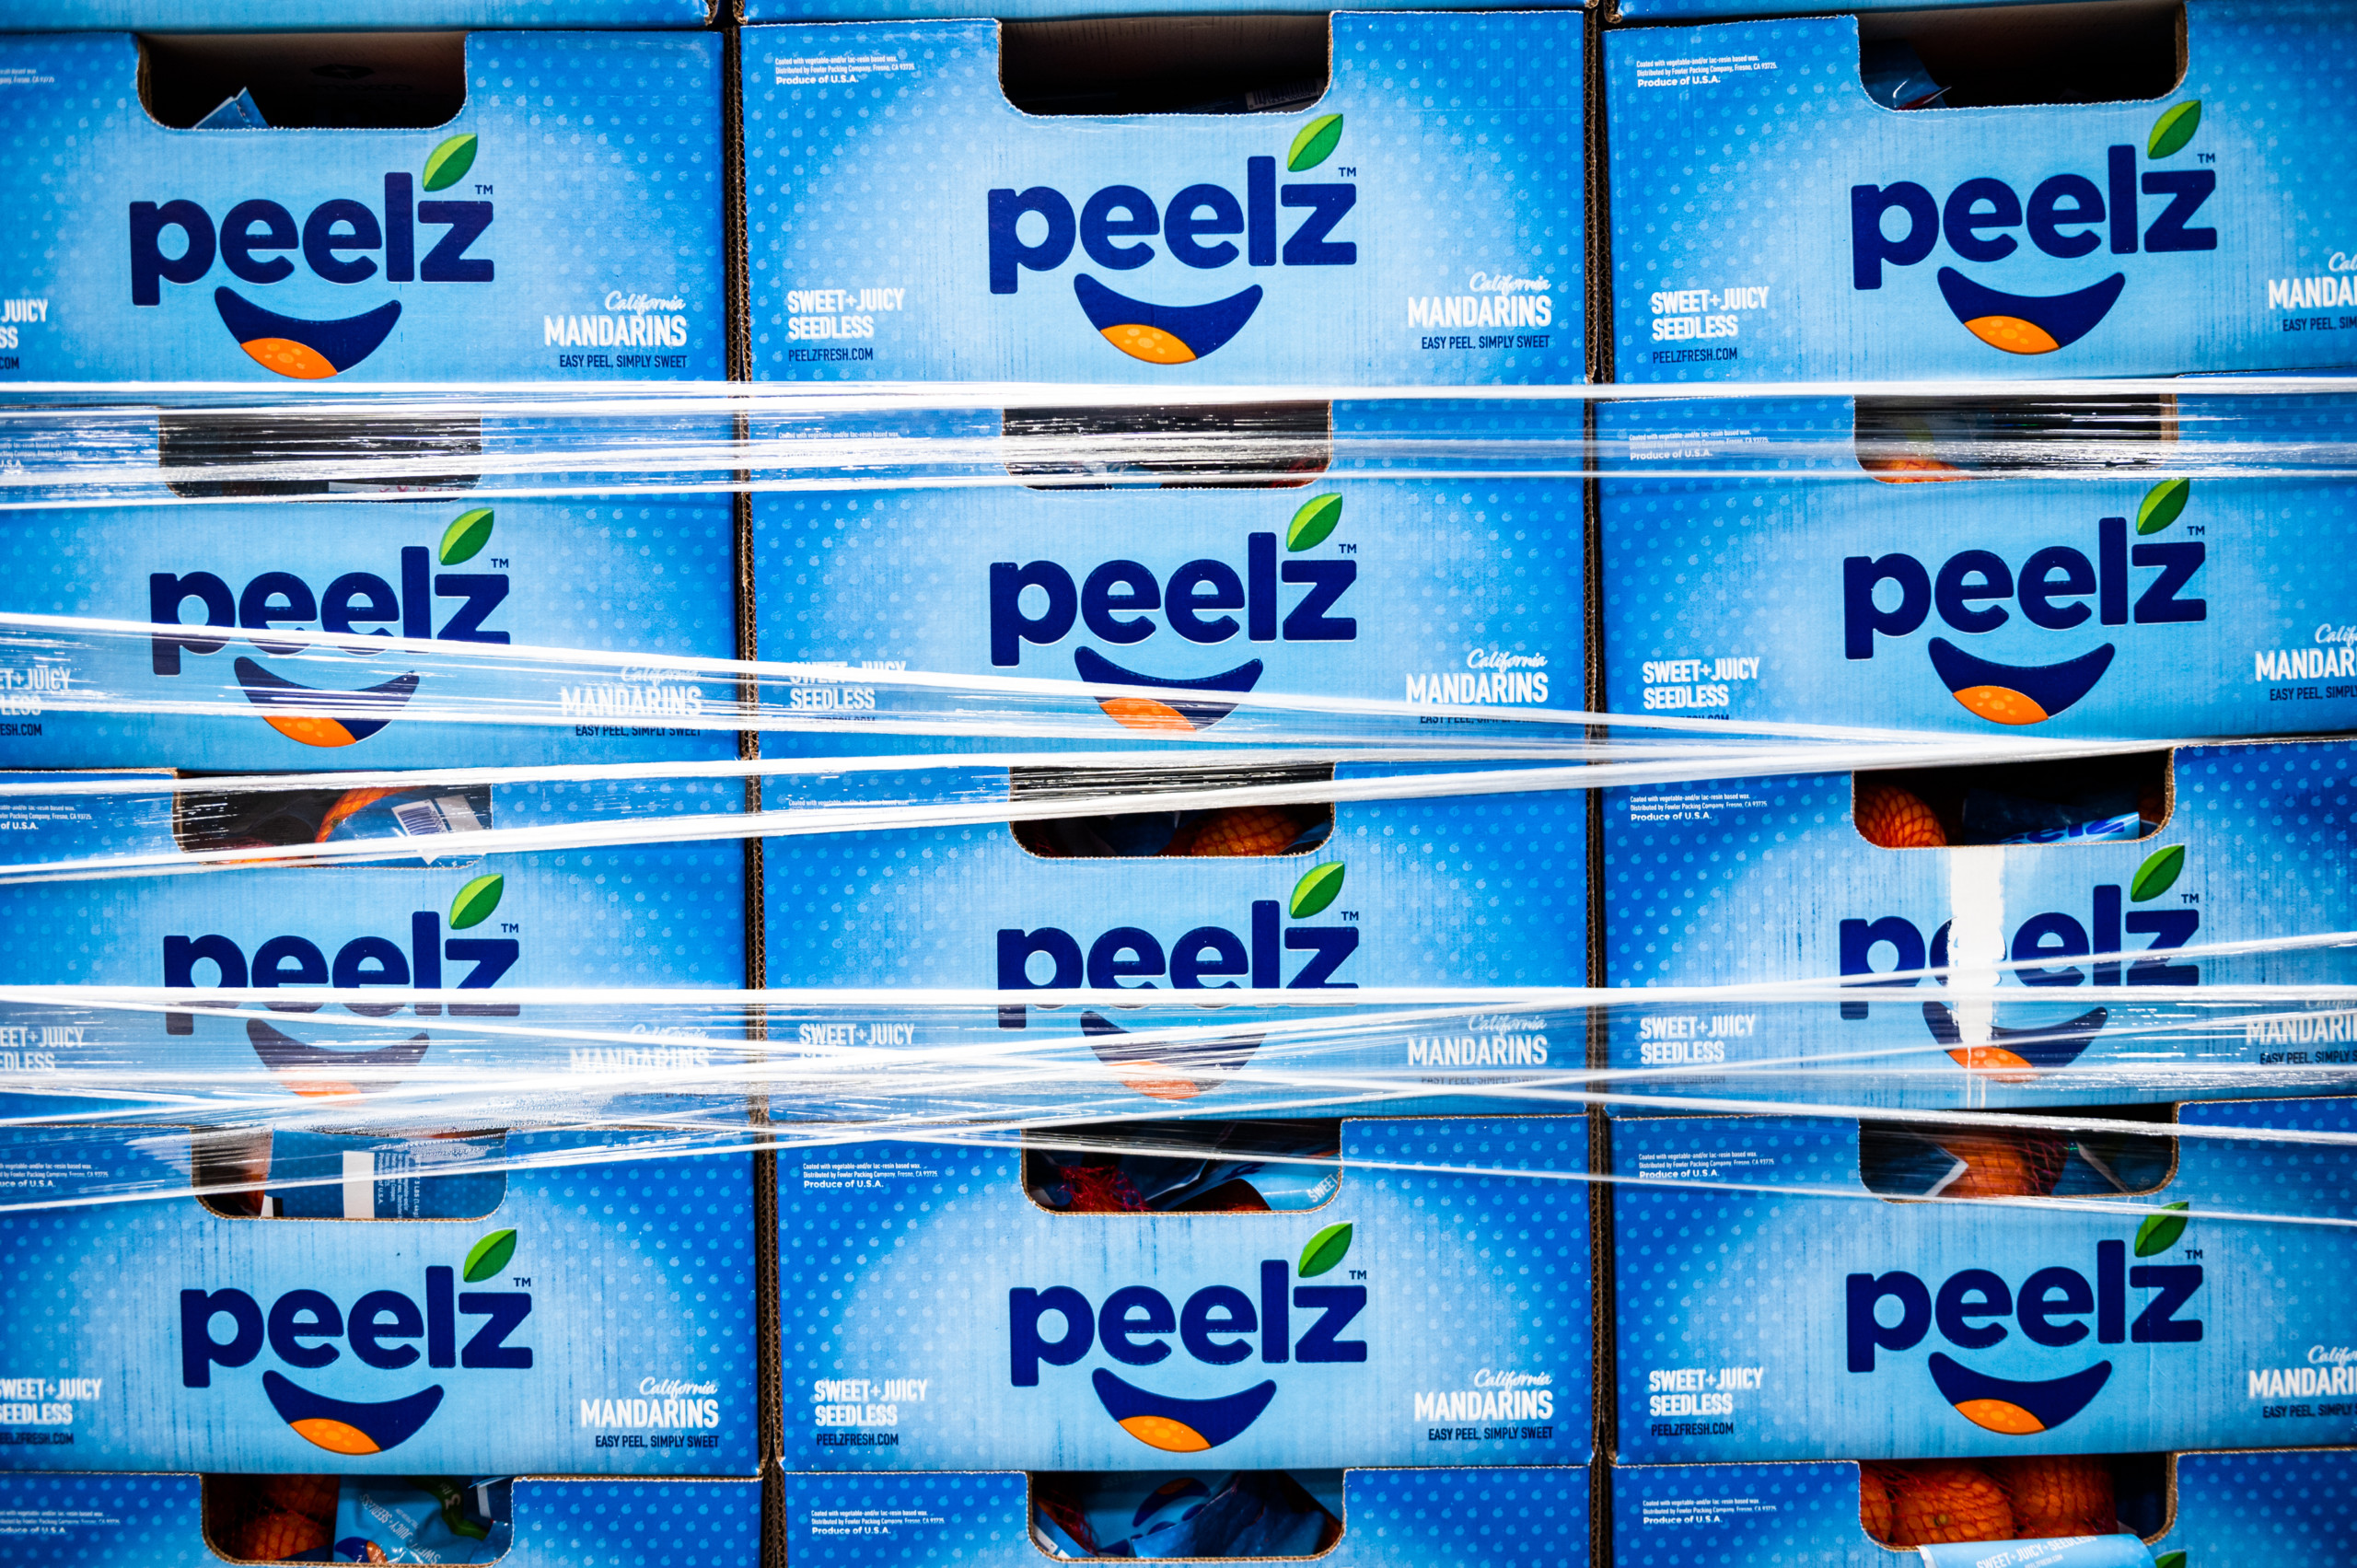 Cases of Peelz mandarins washed, bagged, boxed, stacked, wrapped and ready for storage